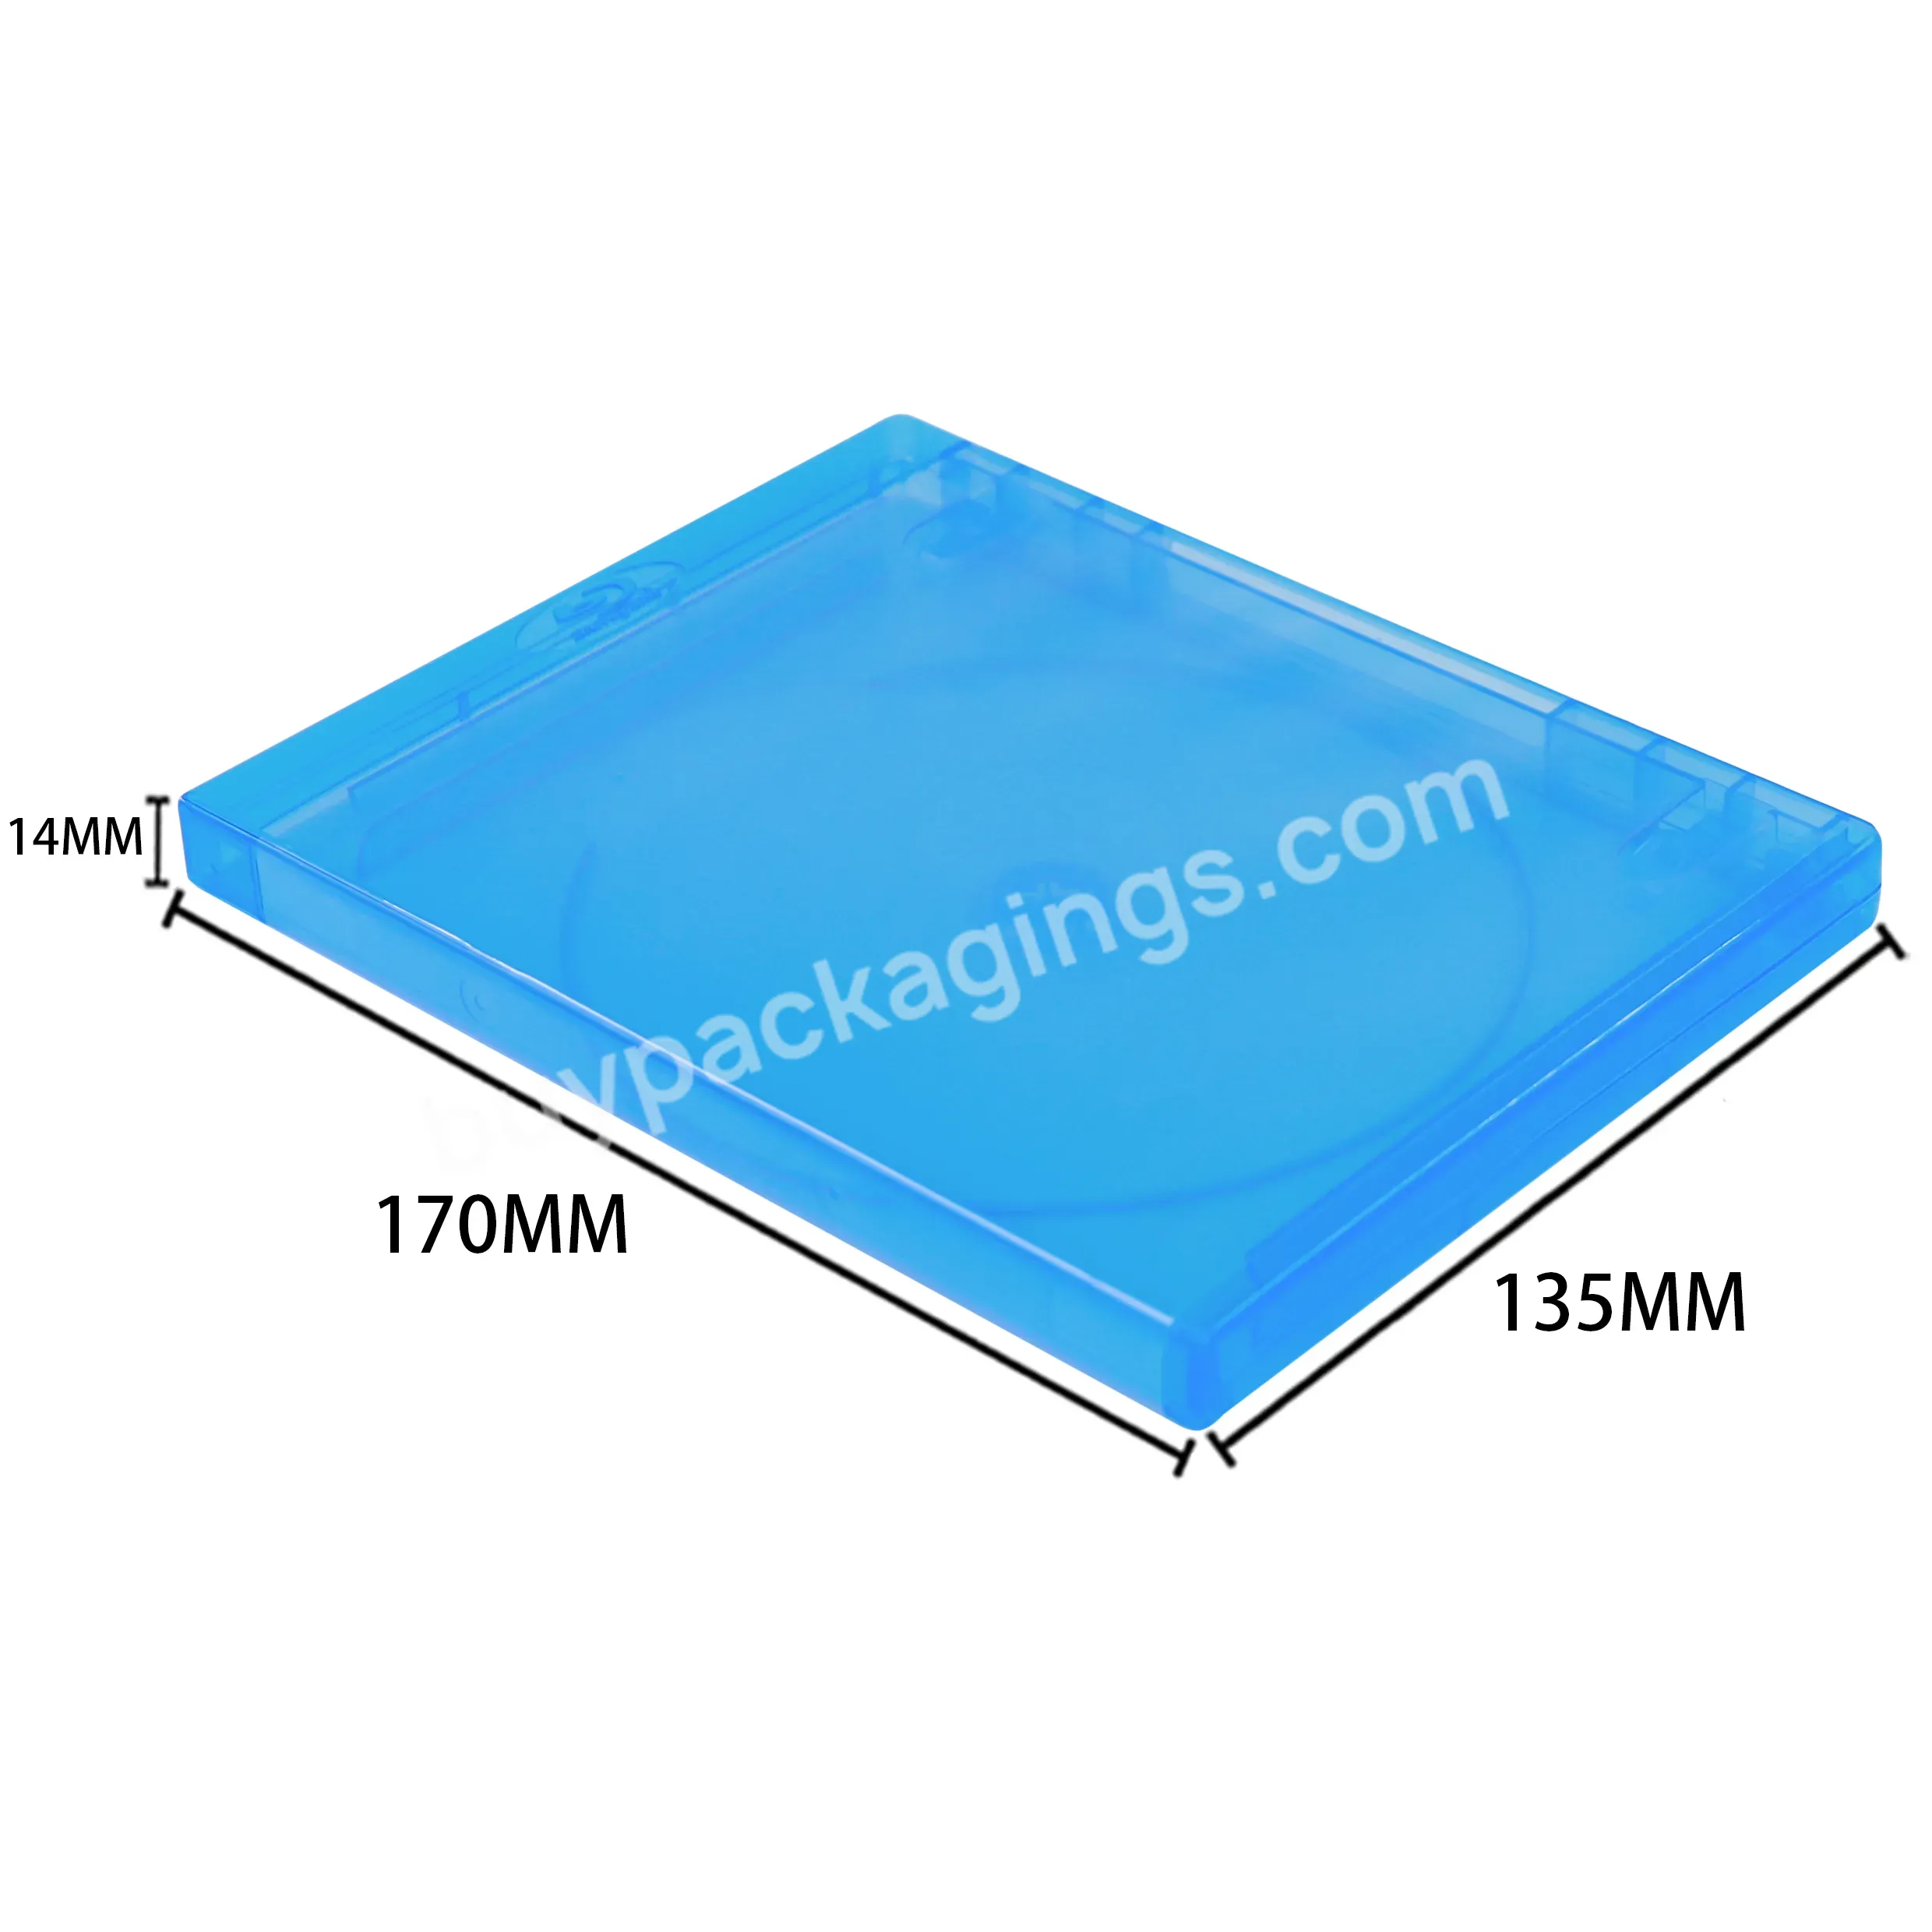 Wholesale Storage Blu-ray Disc Movies Record Cd Blu-ray Case Custom Embossed Logo Clear 14mm Bluray Case Blue Dvd Case - Buy Blue Dvd Case,Blu-ray Case,14mm Bluray Case.